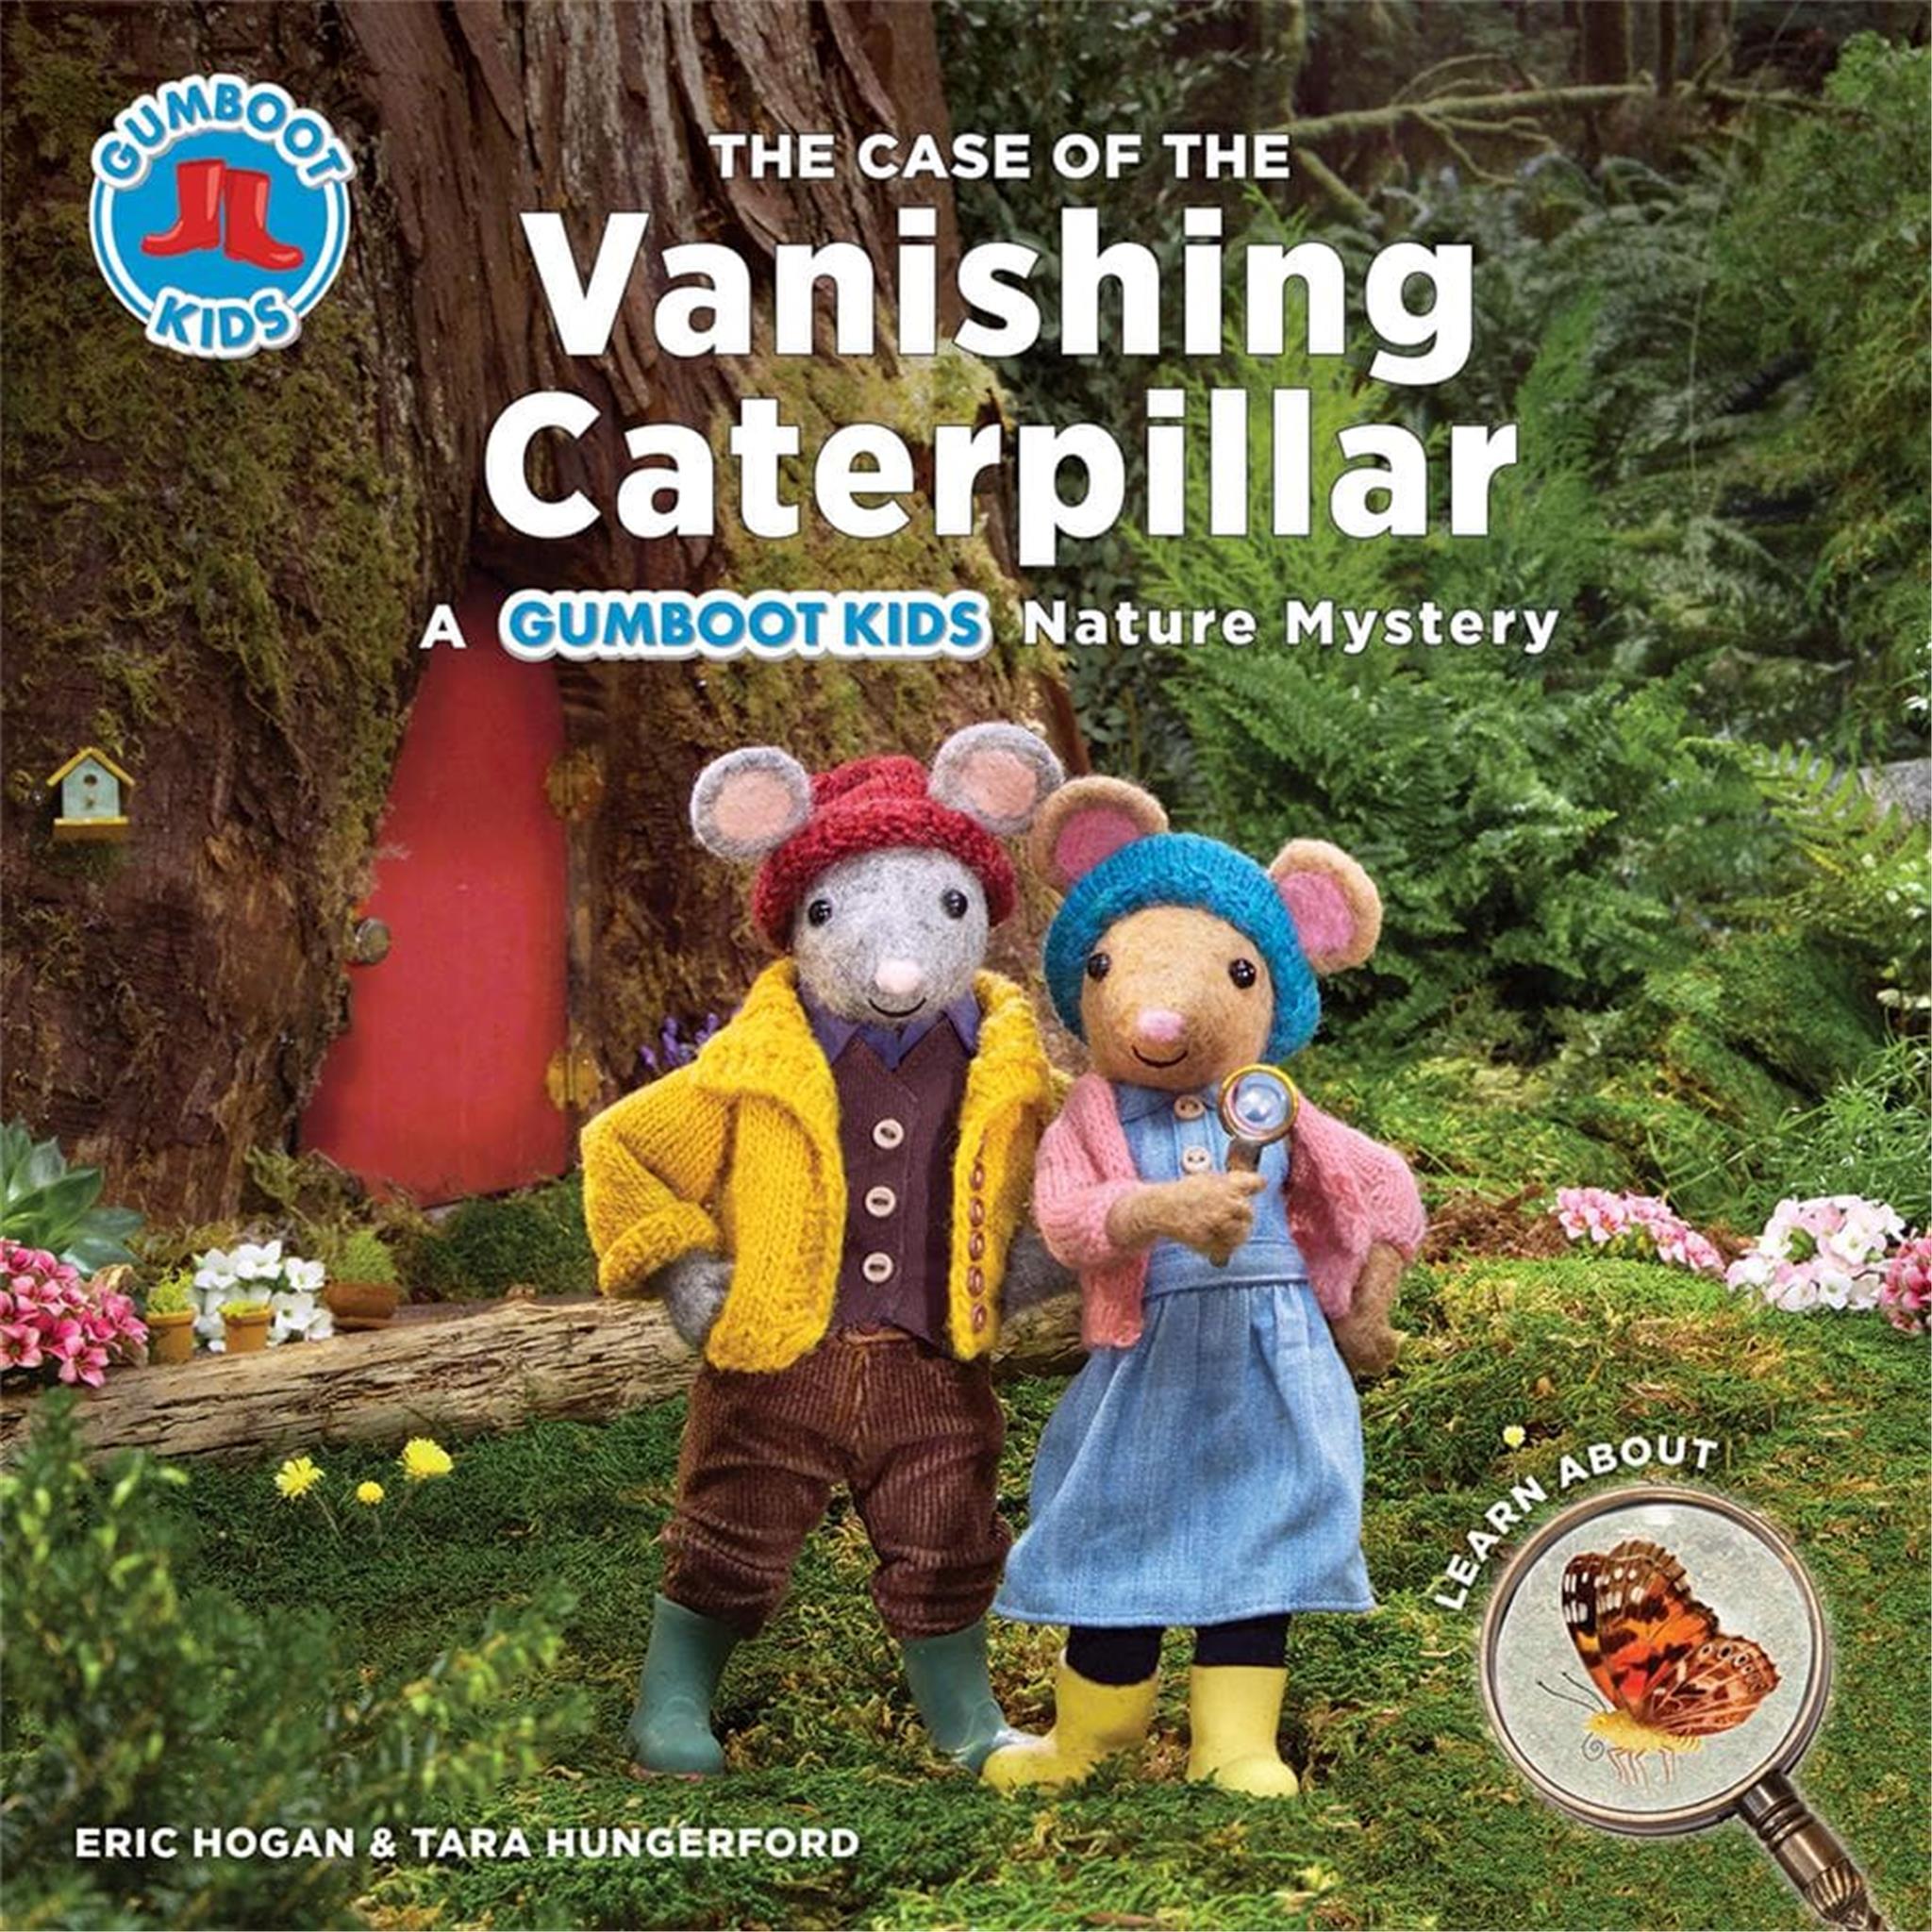 The Case of the Vanishing Caterpillar: A Gumboot Kids Nature Mystery Book